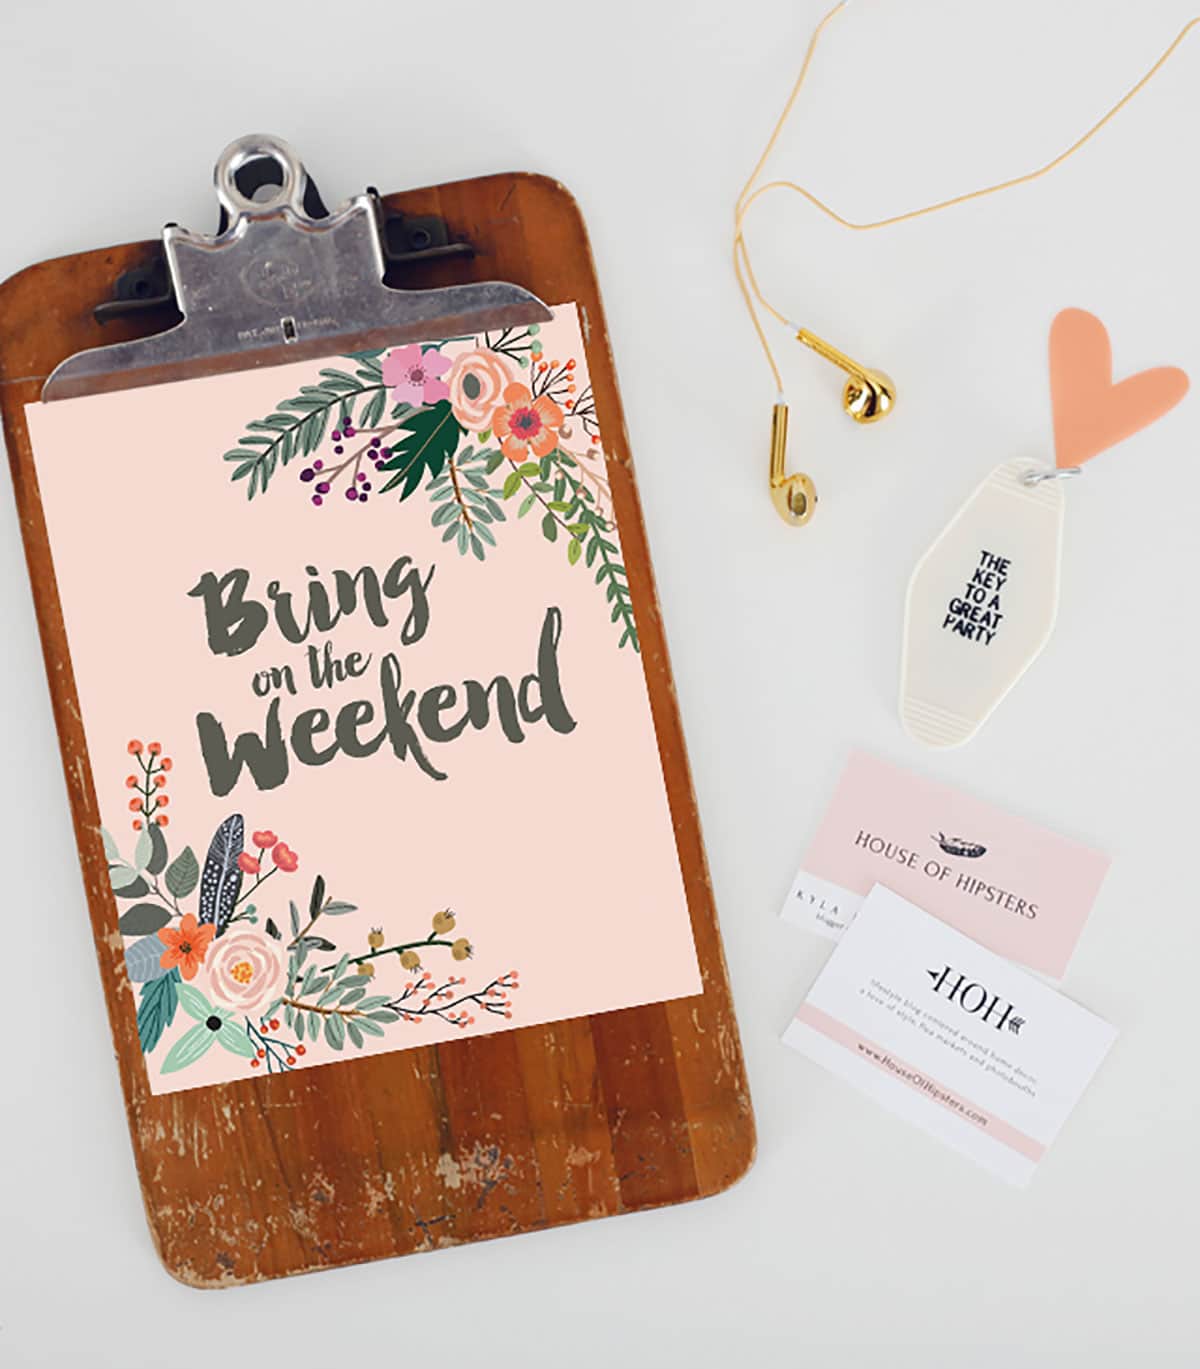 Get inspired by this Bring On The Weekend free printable. Inspirational words for your walls